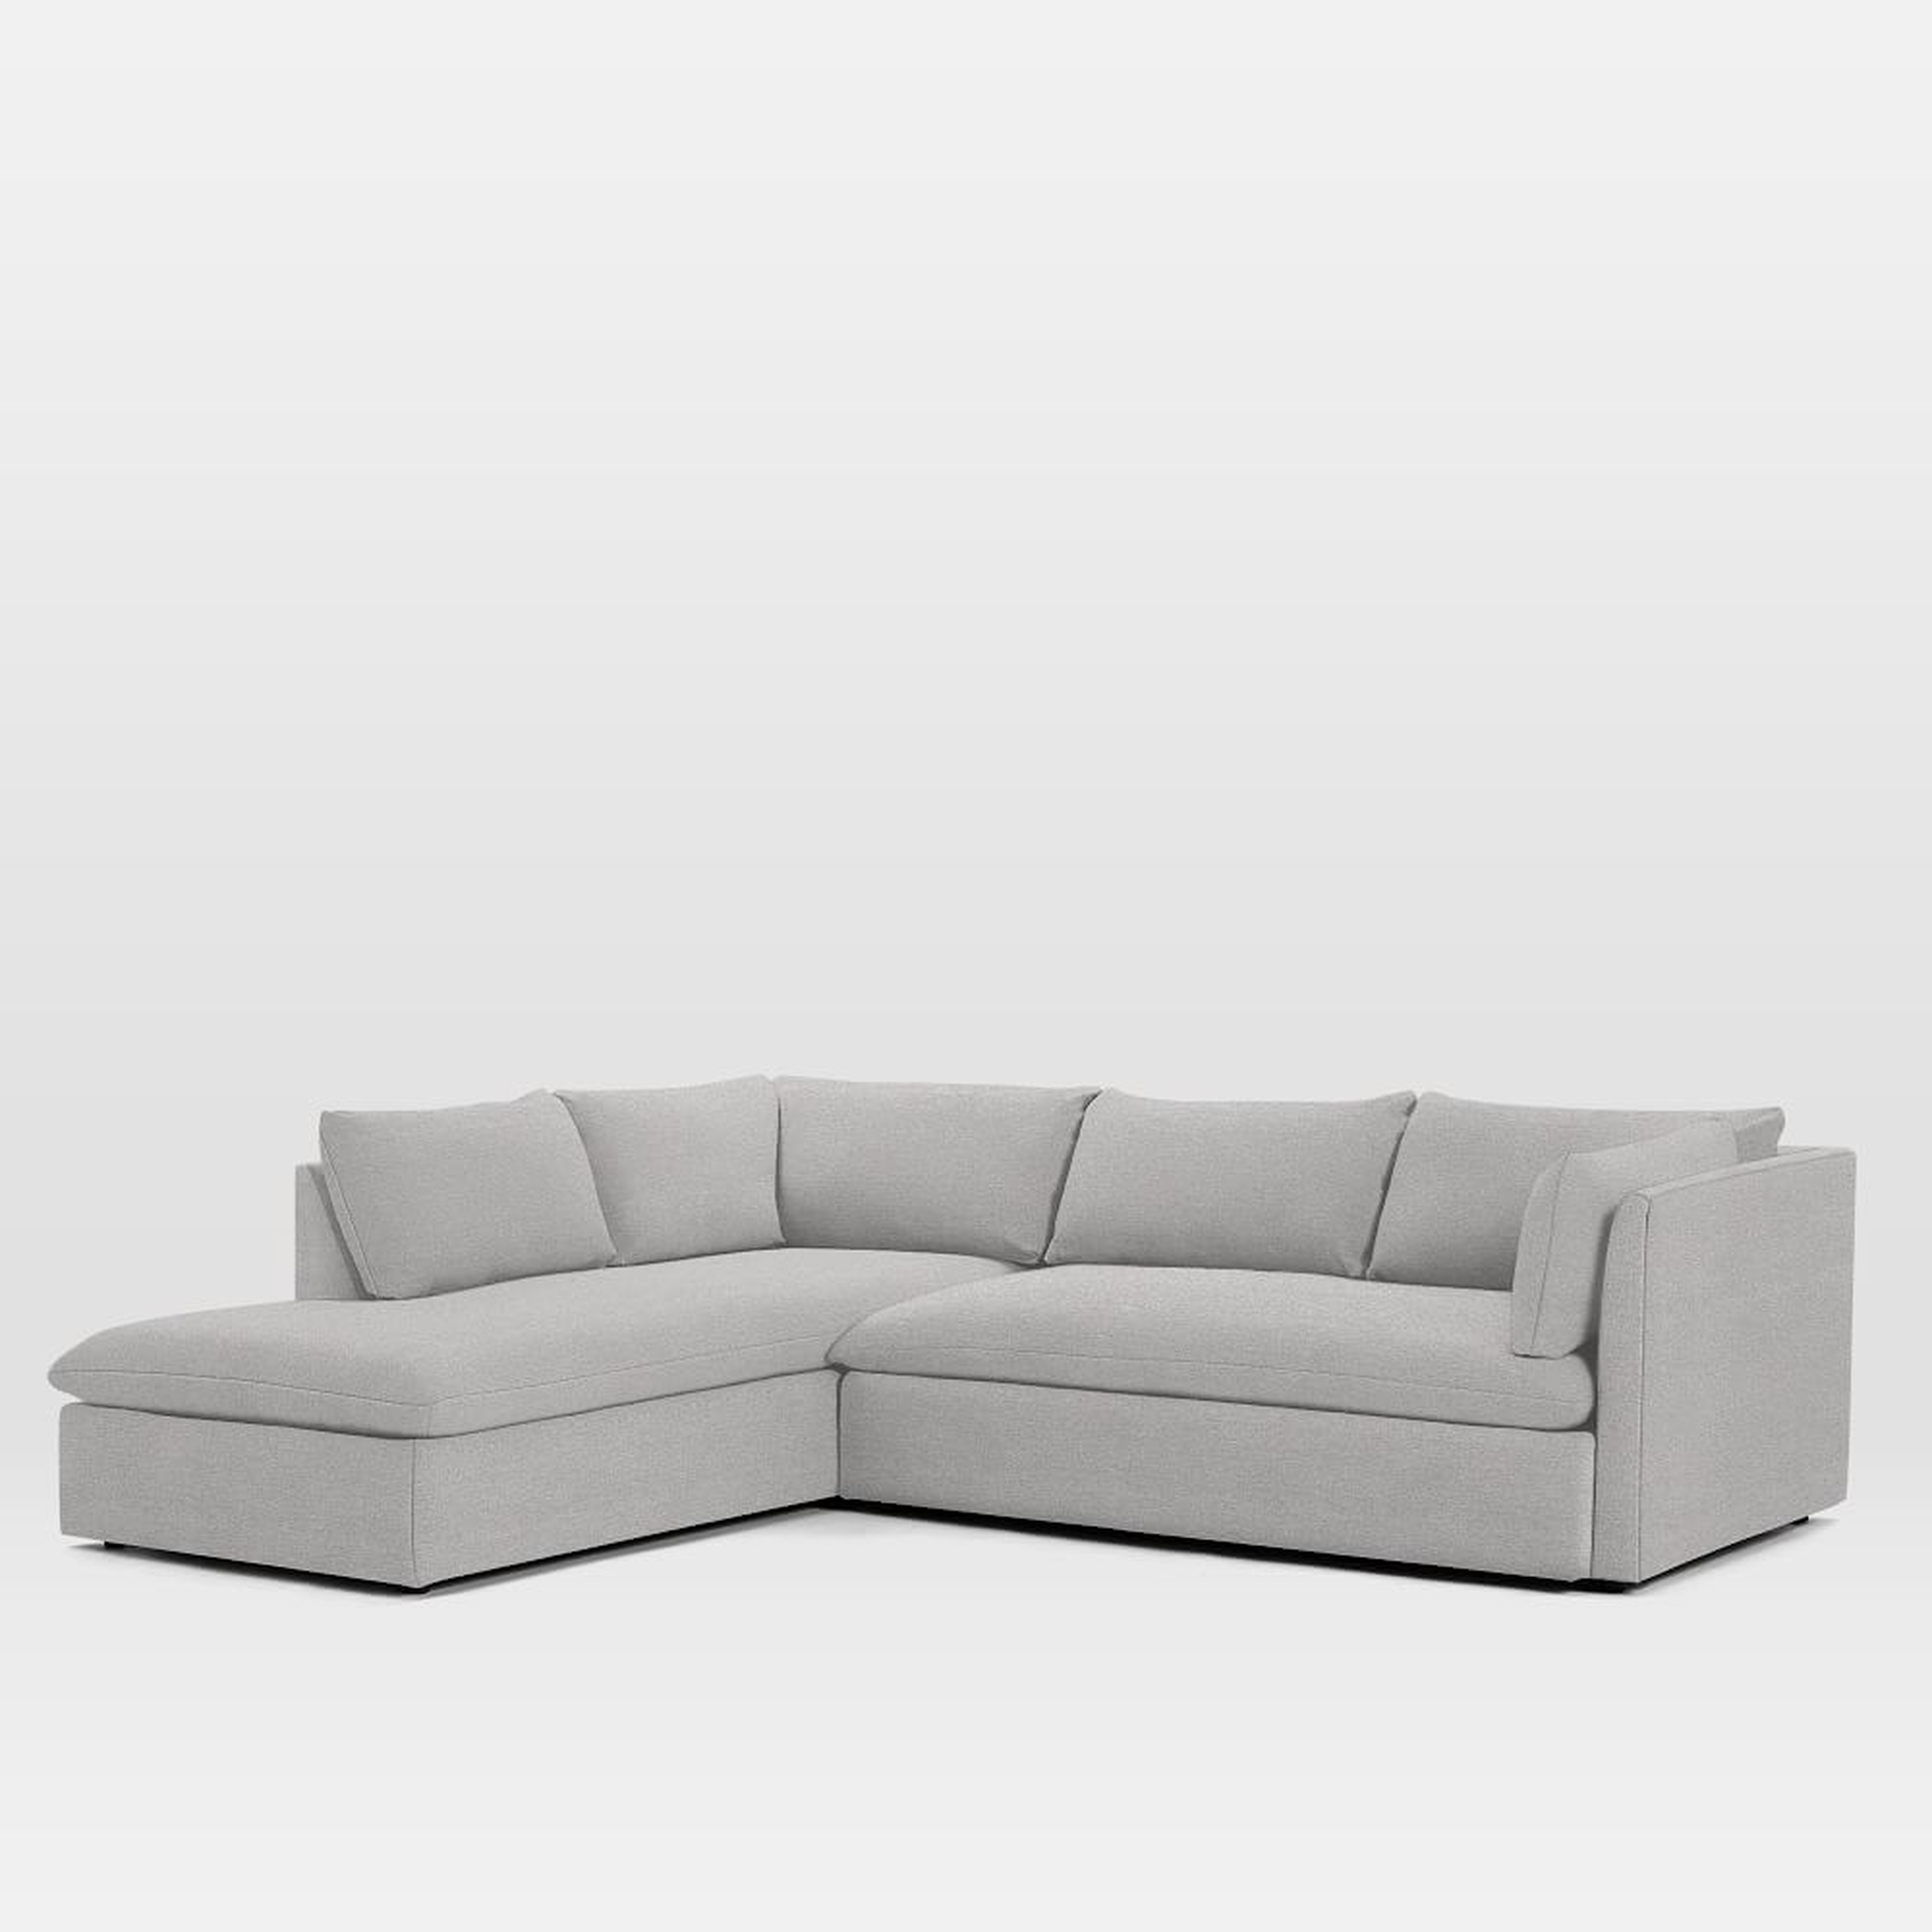 Shelter 106" Left 2-Piece Bumper Chaise Sectional, Chenille Tweed, Frost Gray - West Elm